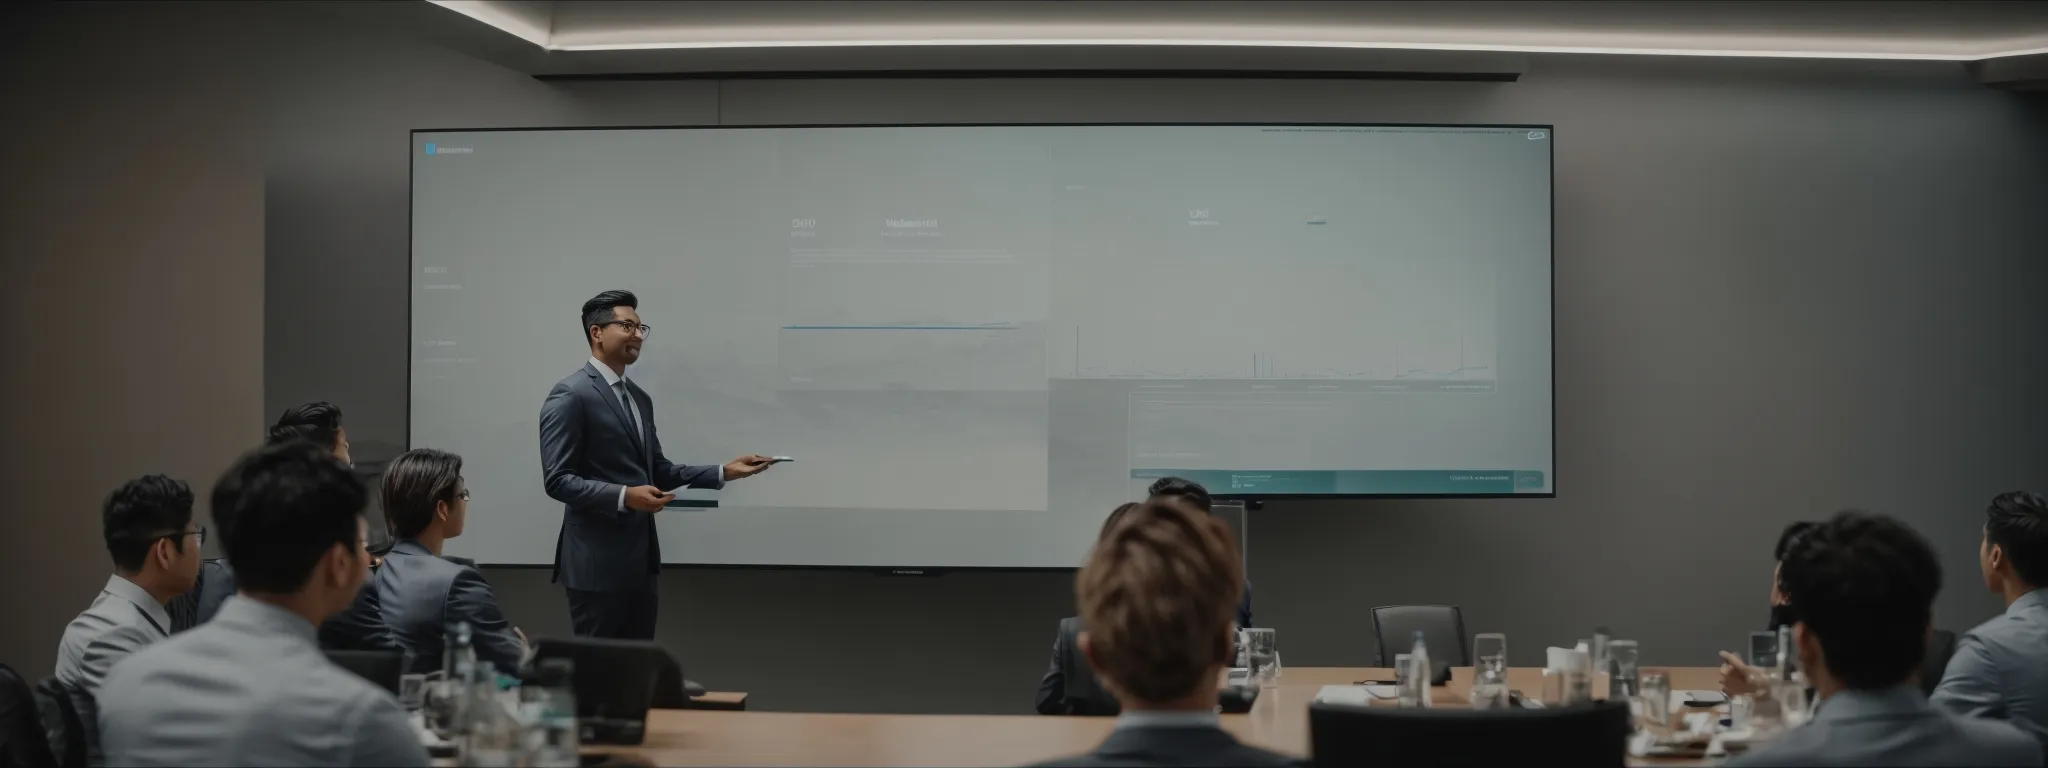 a man presenting a digital marketing strategy on a large monitor to a conference room.